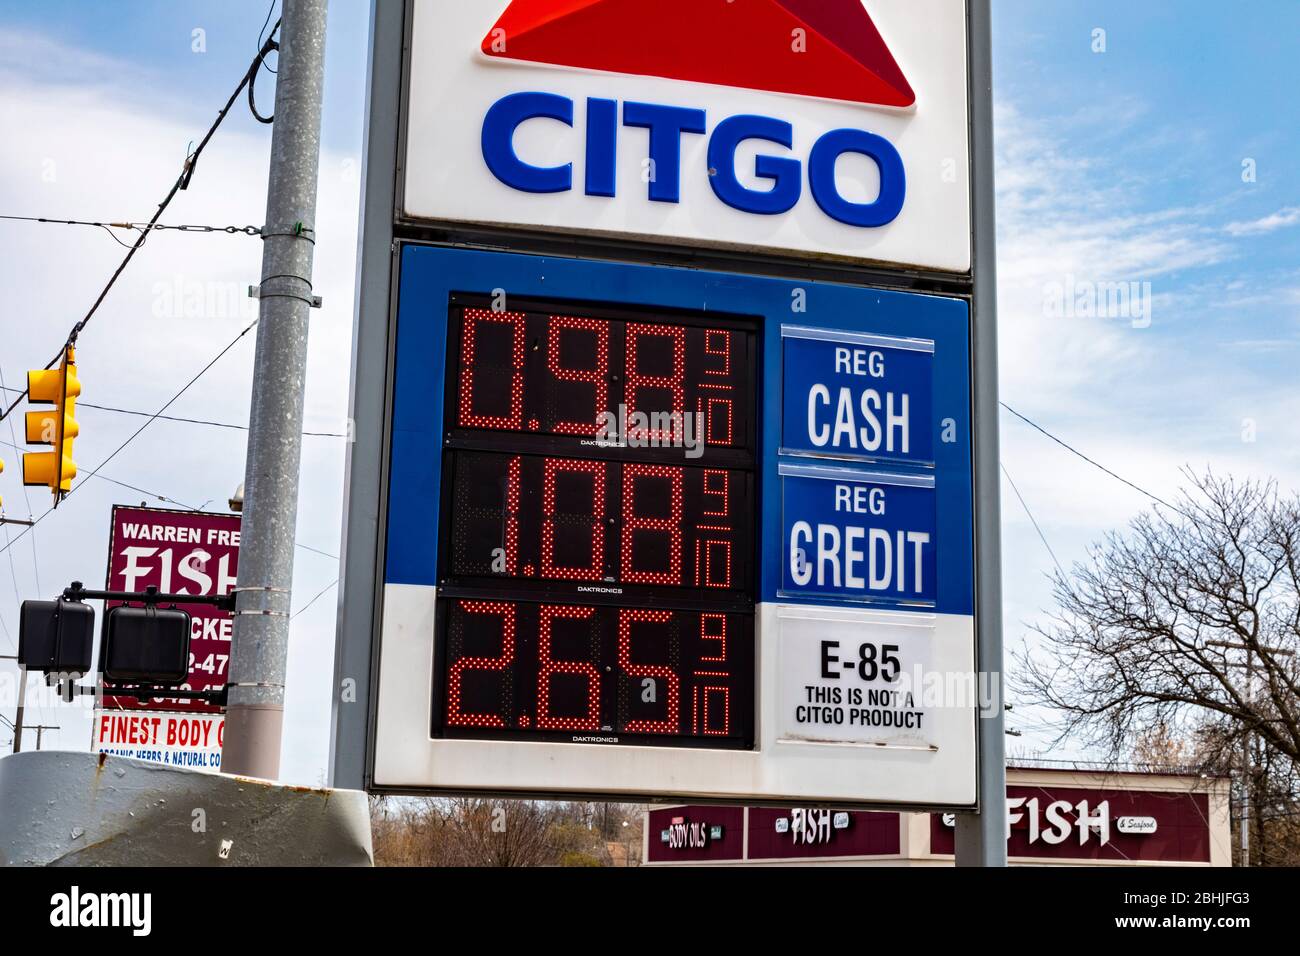 Detroit, United States. 25th Apr, 2020. Detroit, Michigan - With gasoline under $1.00 a gallon due to the coronavirus pandemic, E85 cannot compete at this Citgo station. Usually cheaper than gasoline, E85 is a blend of gasoline and up to 85% corn-based ethanol. In the United States, about 40% of the corn crop is used to make ethanol. Credit: Jim West/Alamy Live News Stock Photo